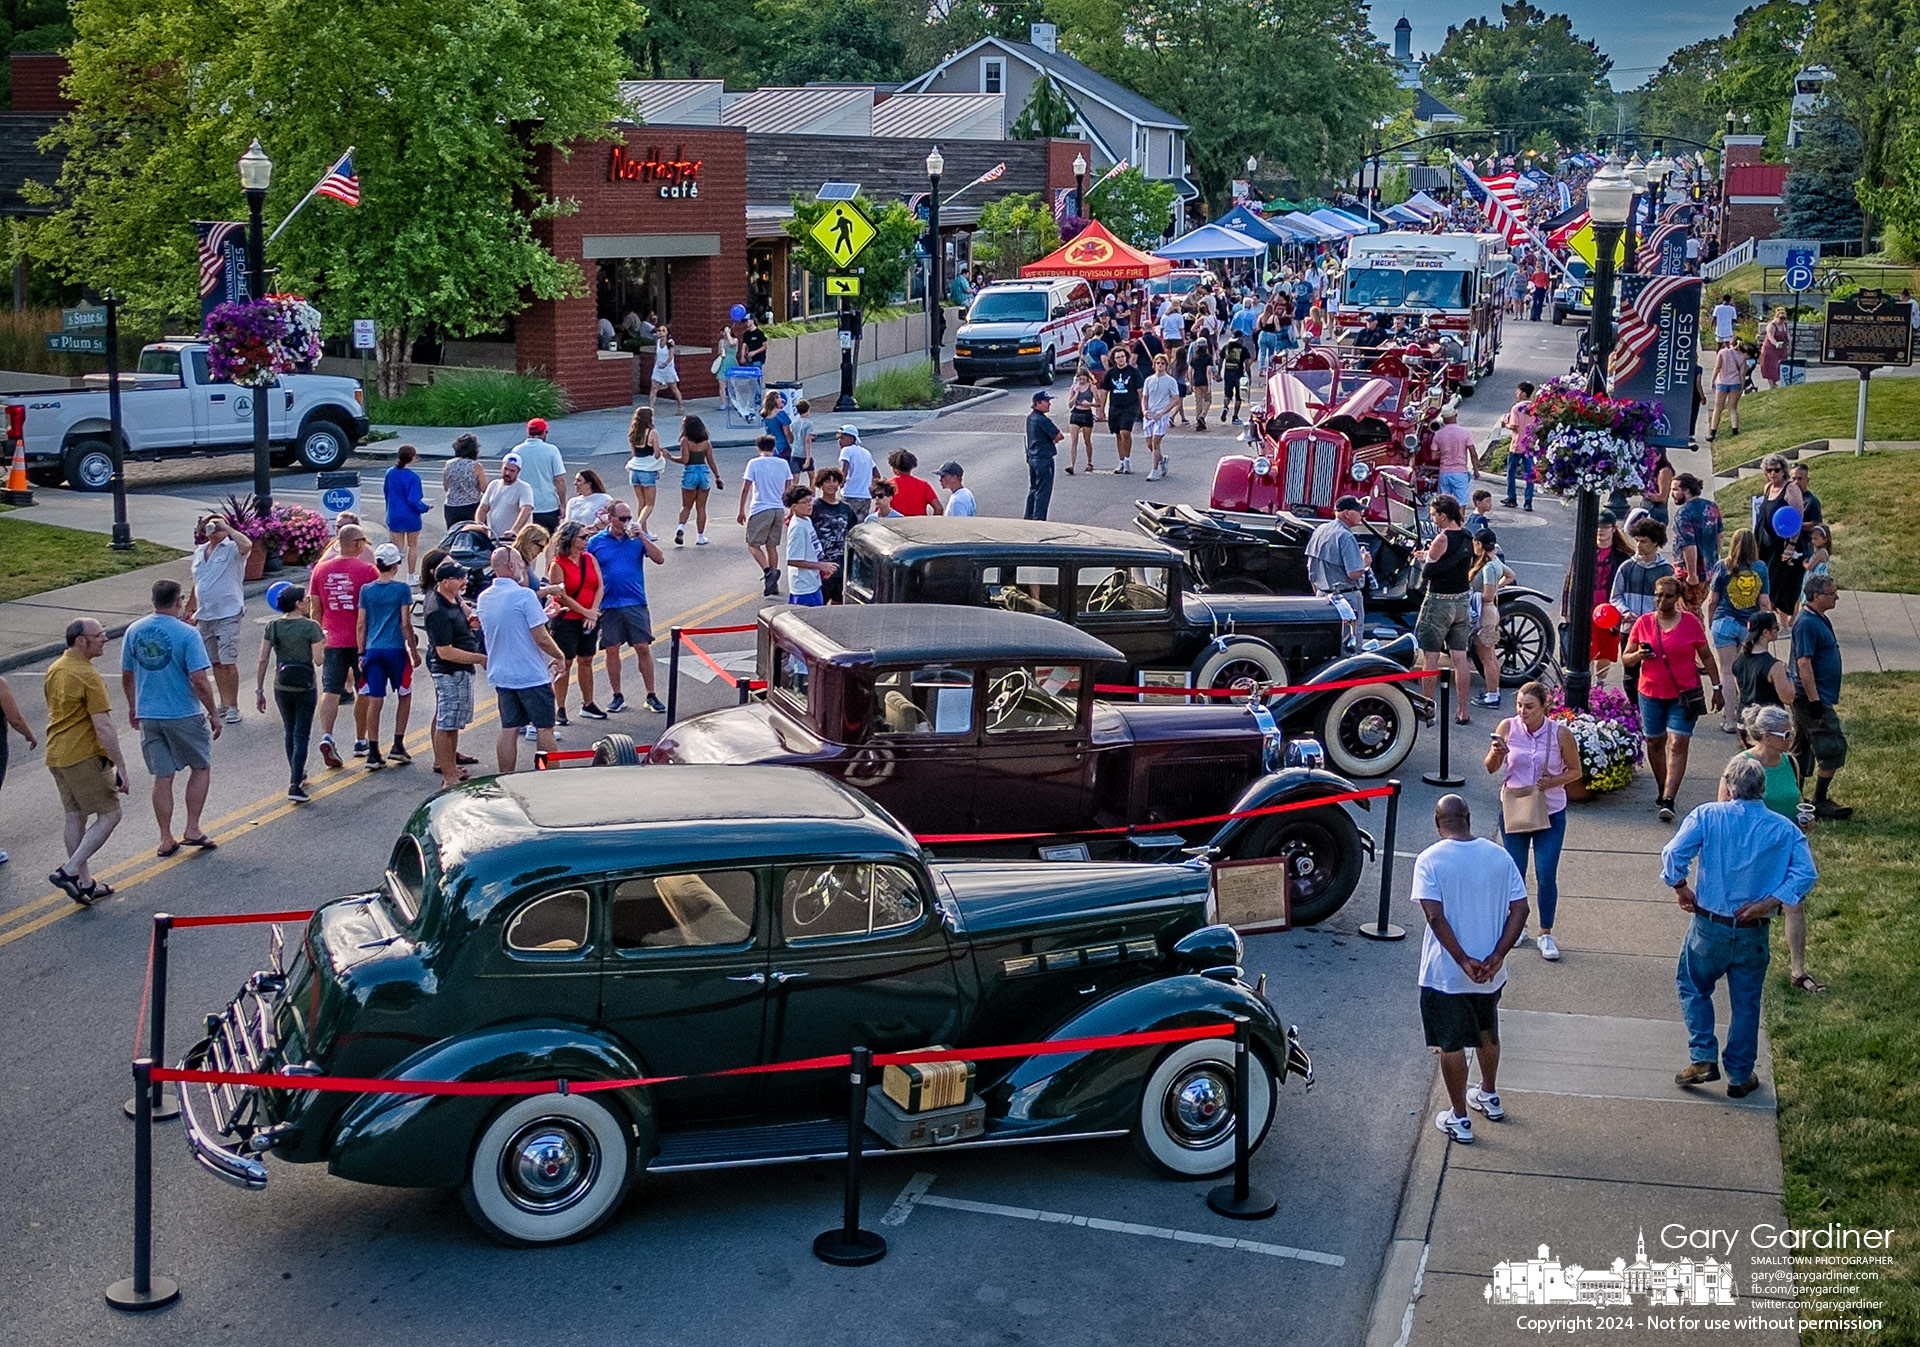 Vintage motor cars were parked on 3C Highway in front of the Westerville Library during Fourth Friday to commemorate the 100th anniversary of 3C's completion in the city. My Final Photo for June 28, 2024.